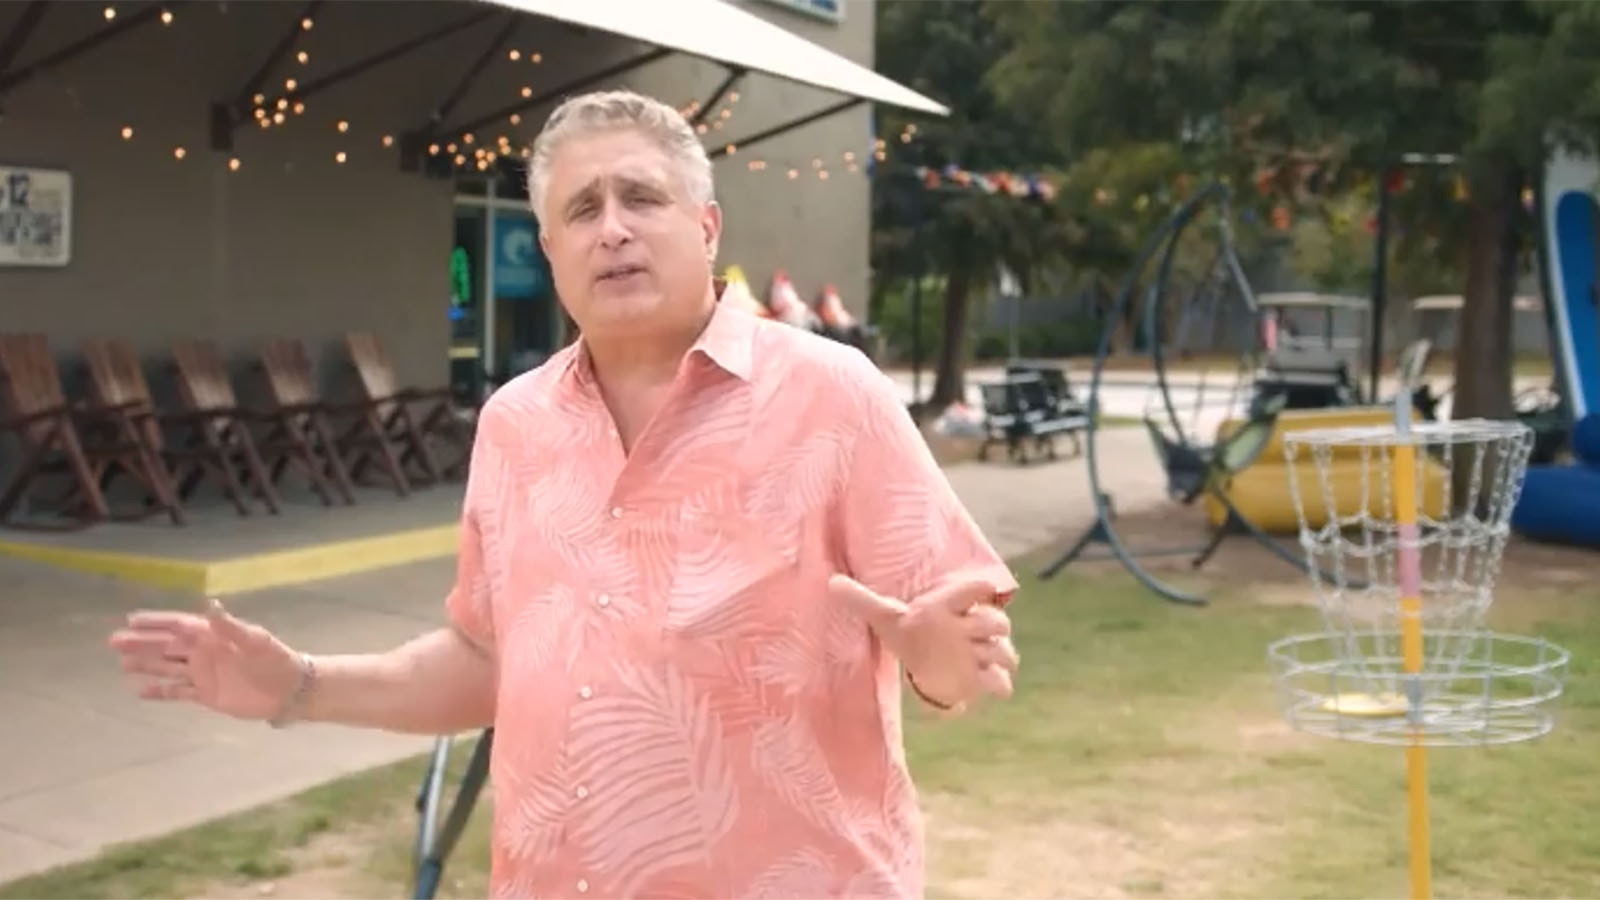 Vincent Fiore in the pilot episode of Black Rock Entertainment's Amazon Prime show “Coast to Coast.” The show highlights popular and lesser-known attractions in communities like Columbus, Georgia. Several Cody locations are on the shooting schedule once it can resume after the SAG-AFTRA writers strike.